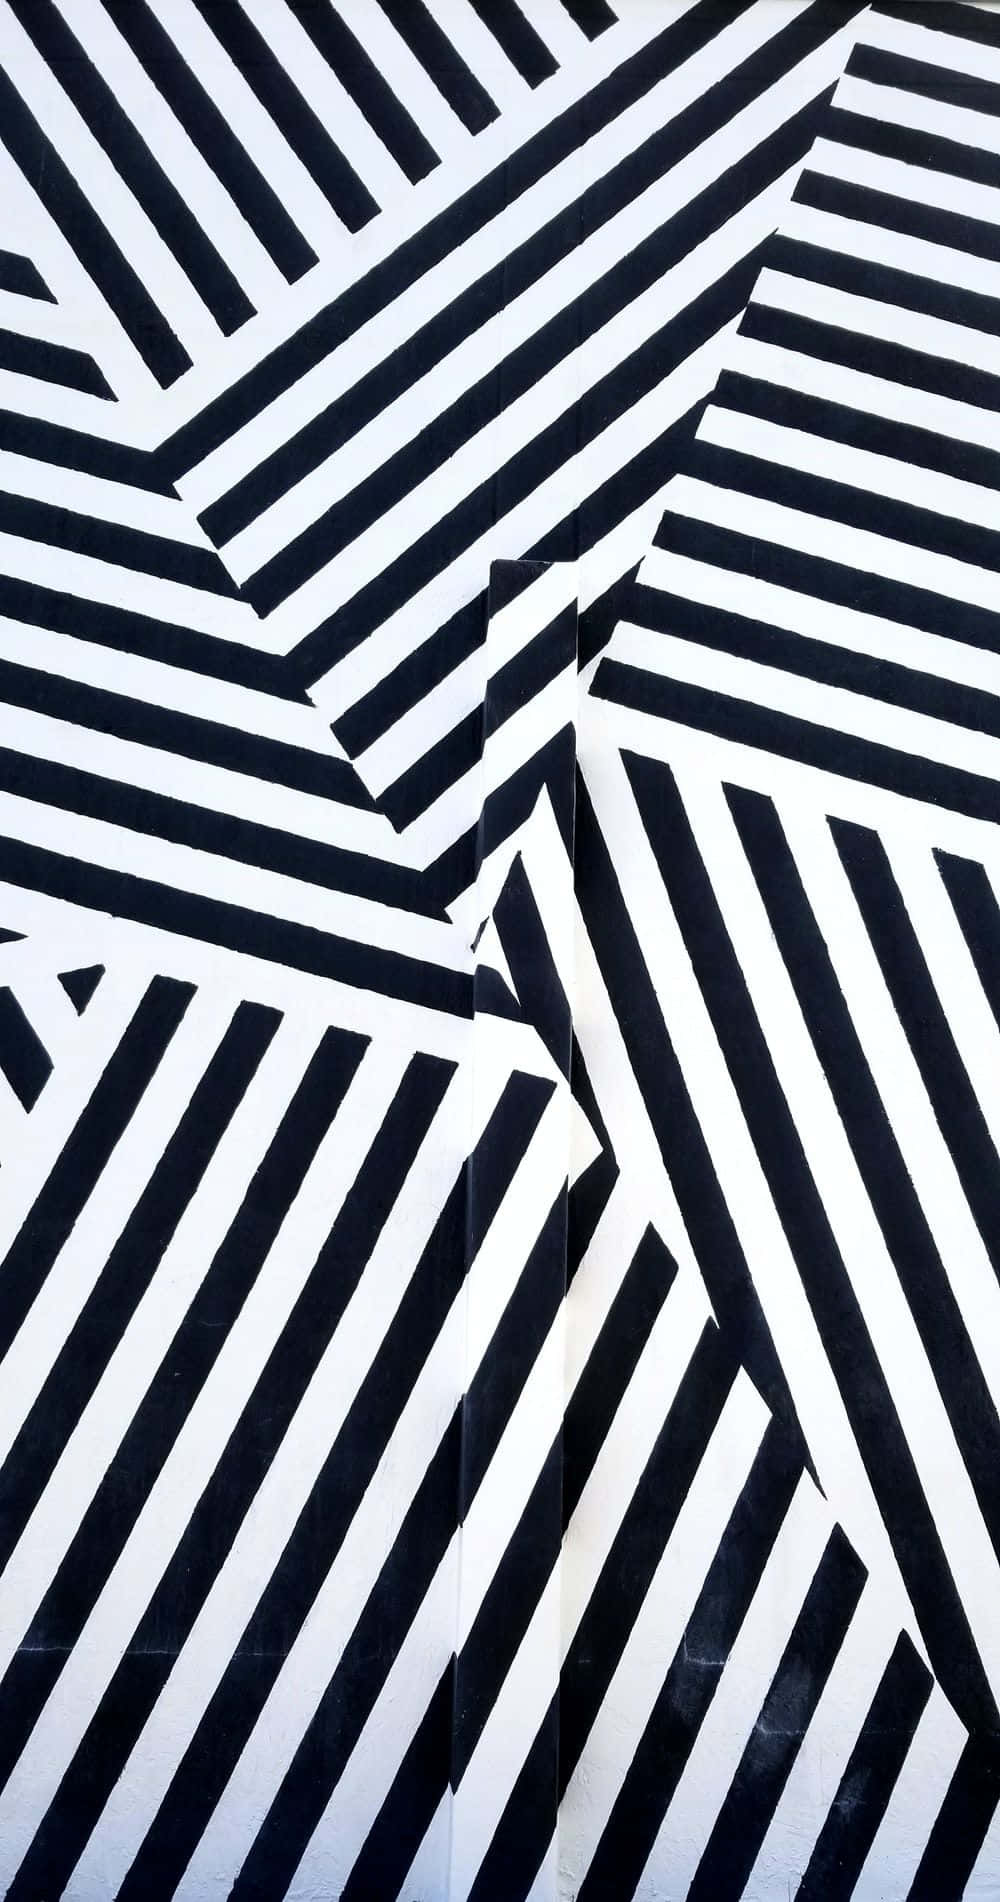 Abstract interplay of black and white stripe